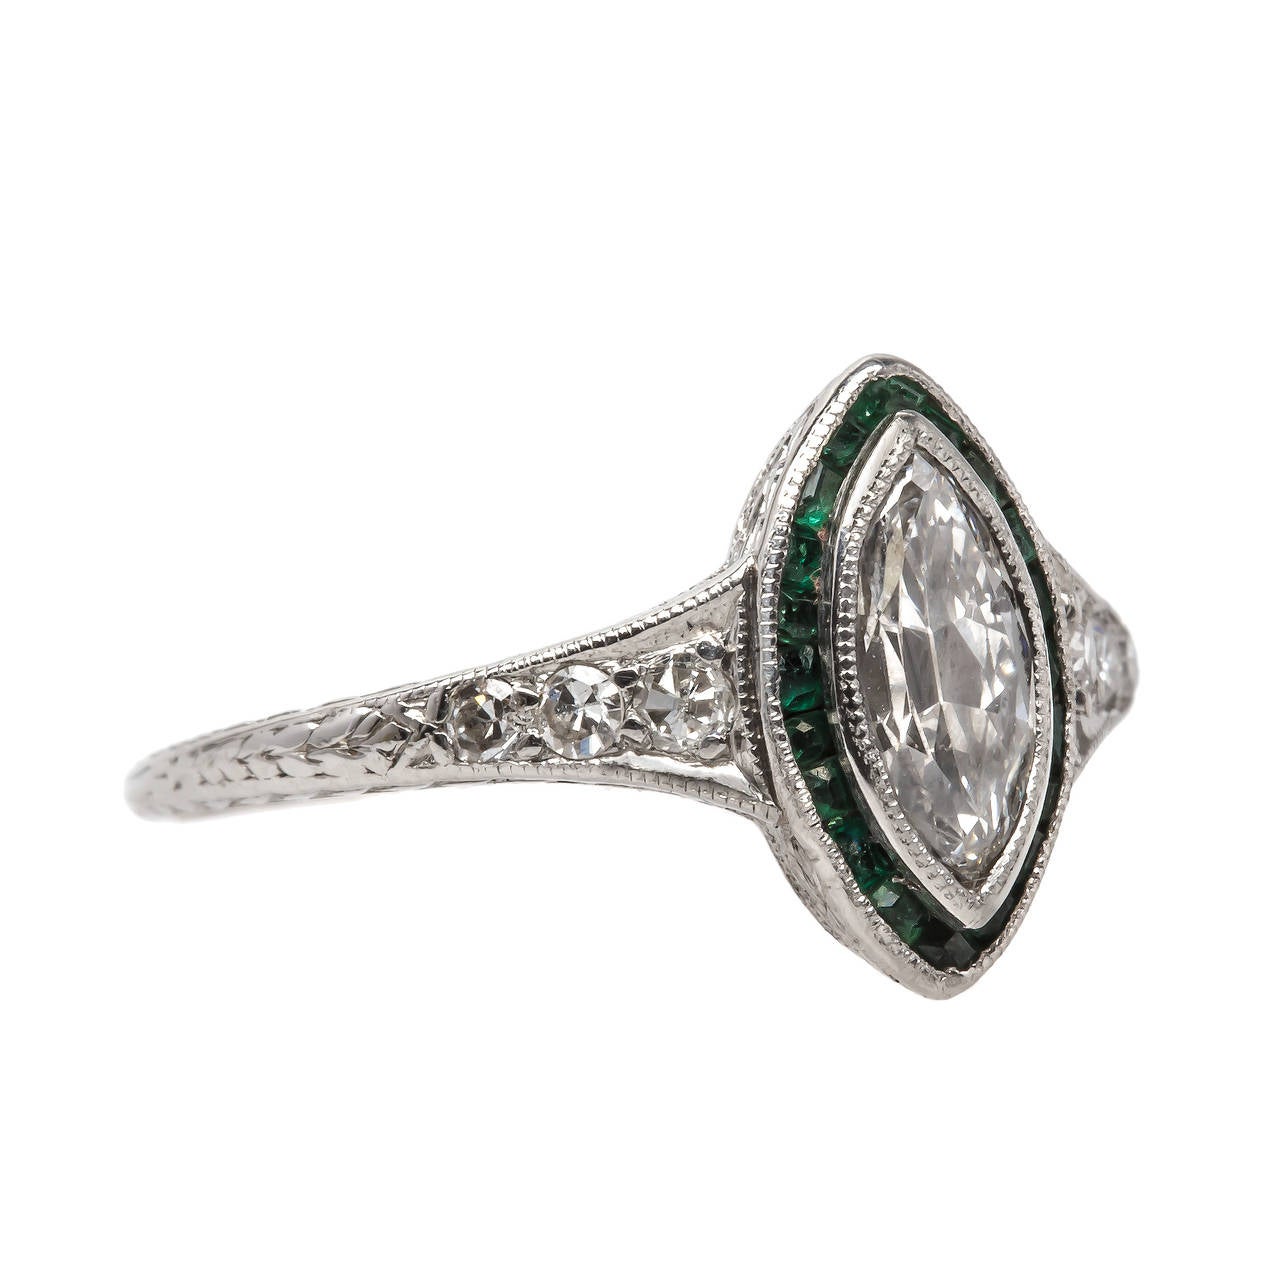 Avery is an authentic unique platinum Art Deco (Circa 1920) ring featuring a bezel set antique cut Marquise diamond weighing exactly 0.38 carat graded F-G color and SI2 clarity. Avery is further decorated with a halo of twenty-one calibre cut